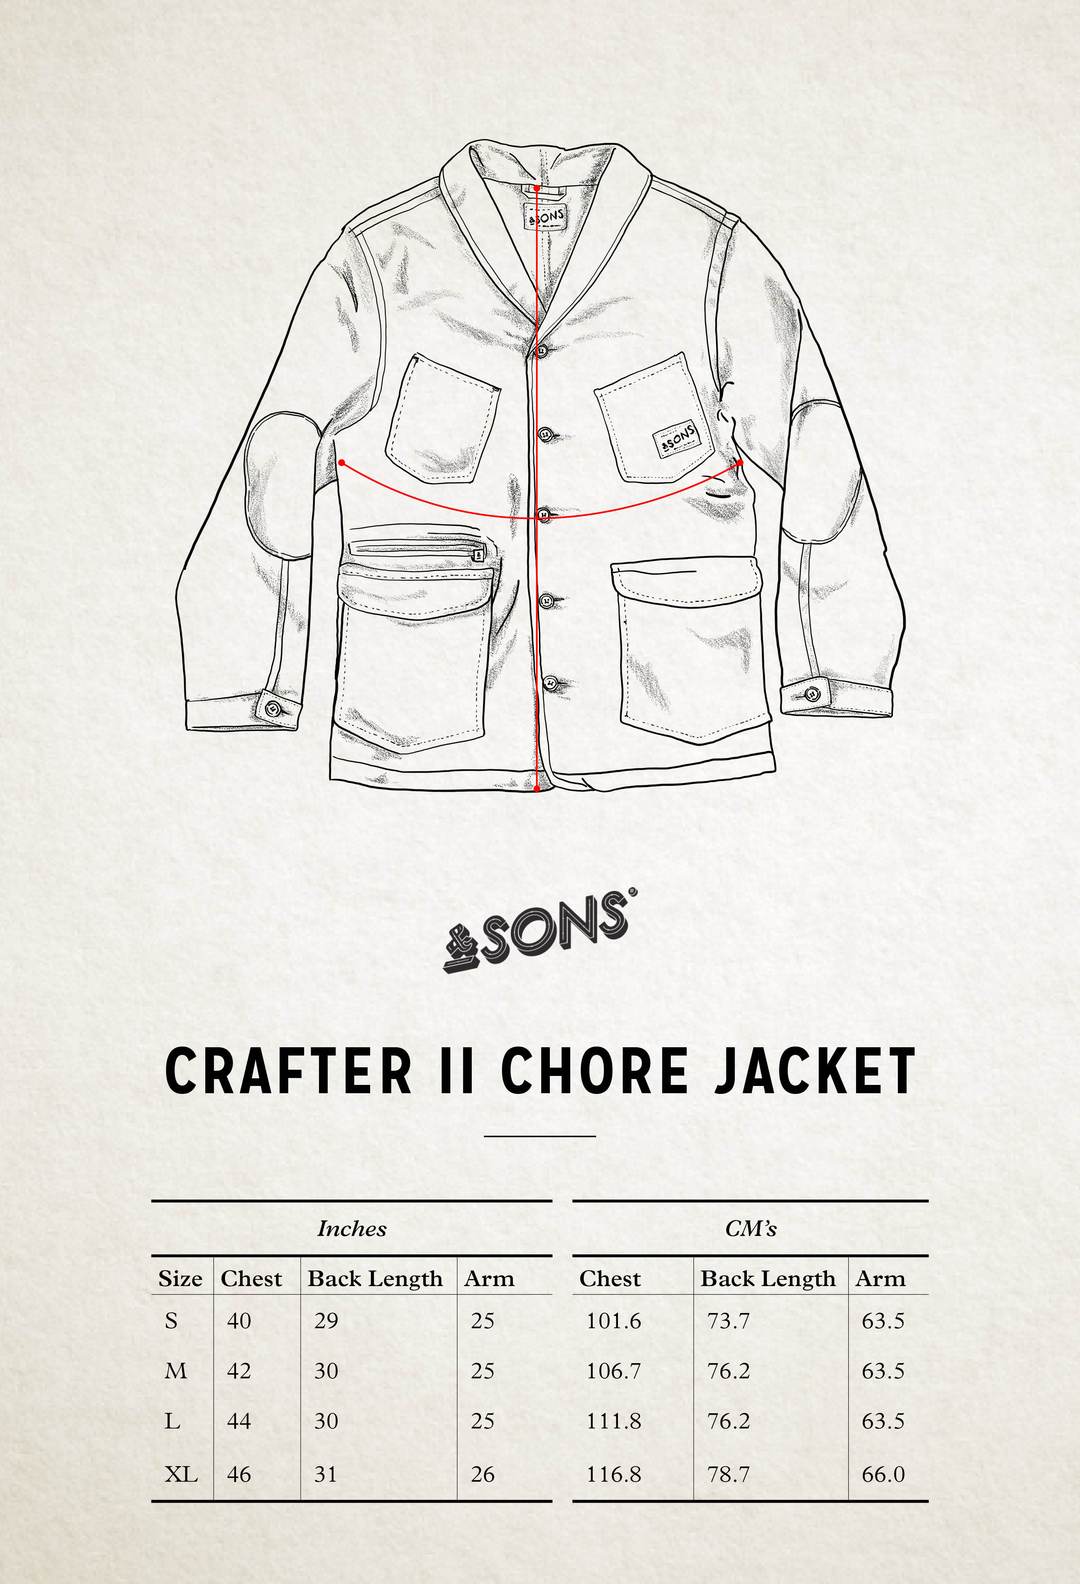 &SONS Crafter II Chore Jacket Size Chart